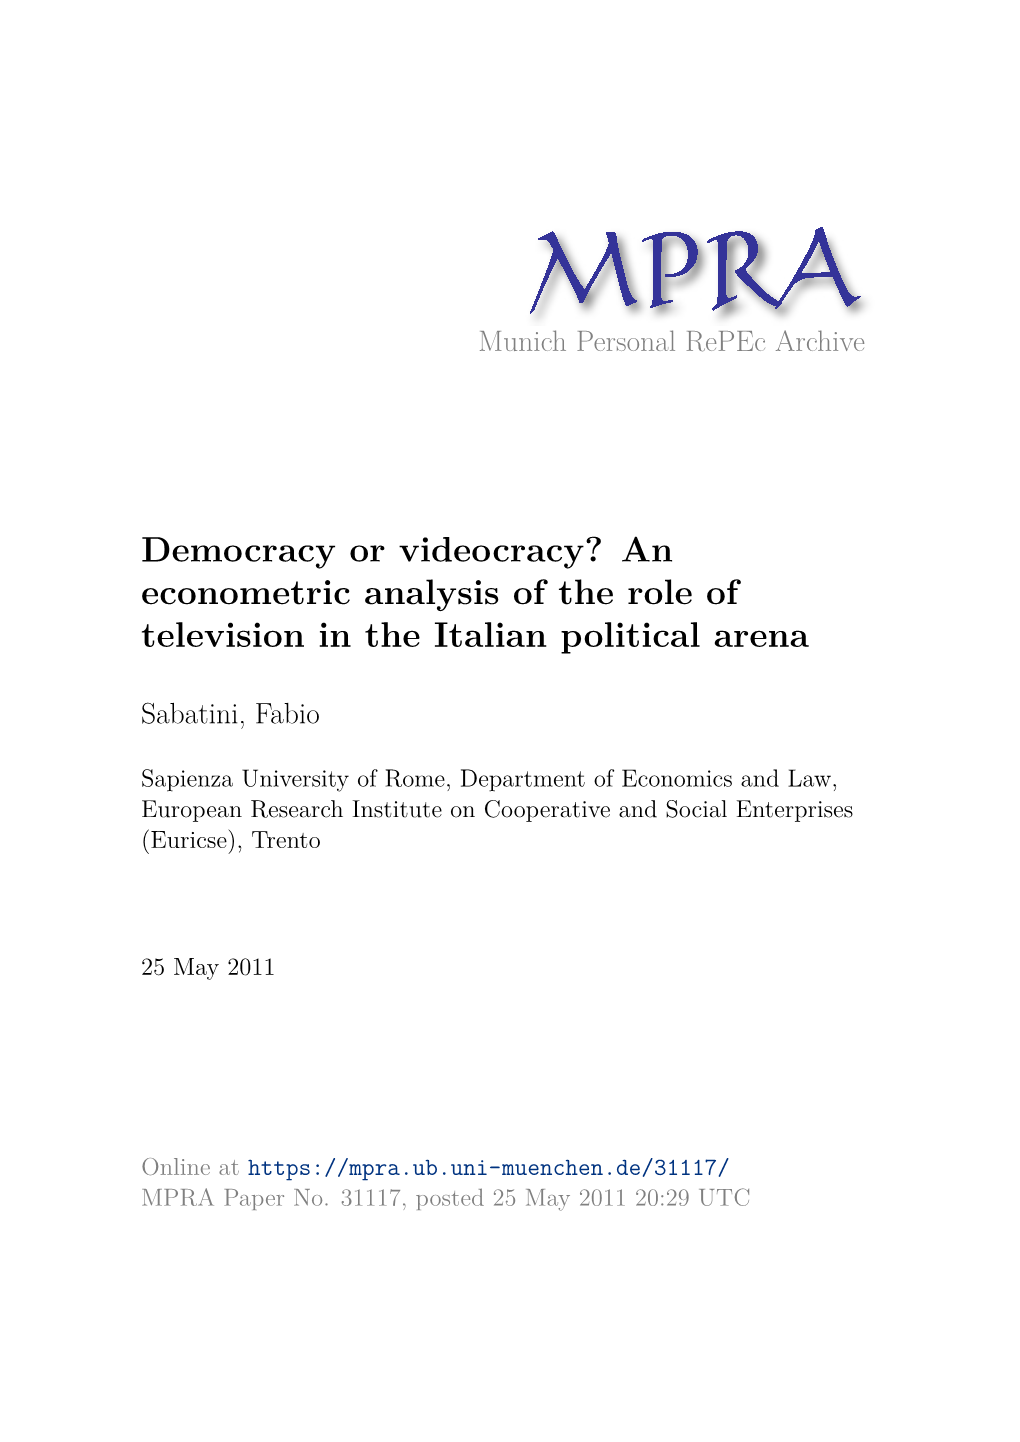 Democracy Or Videocracy? an Econometric Analysis of the Role of Television in the Italian Political Arena